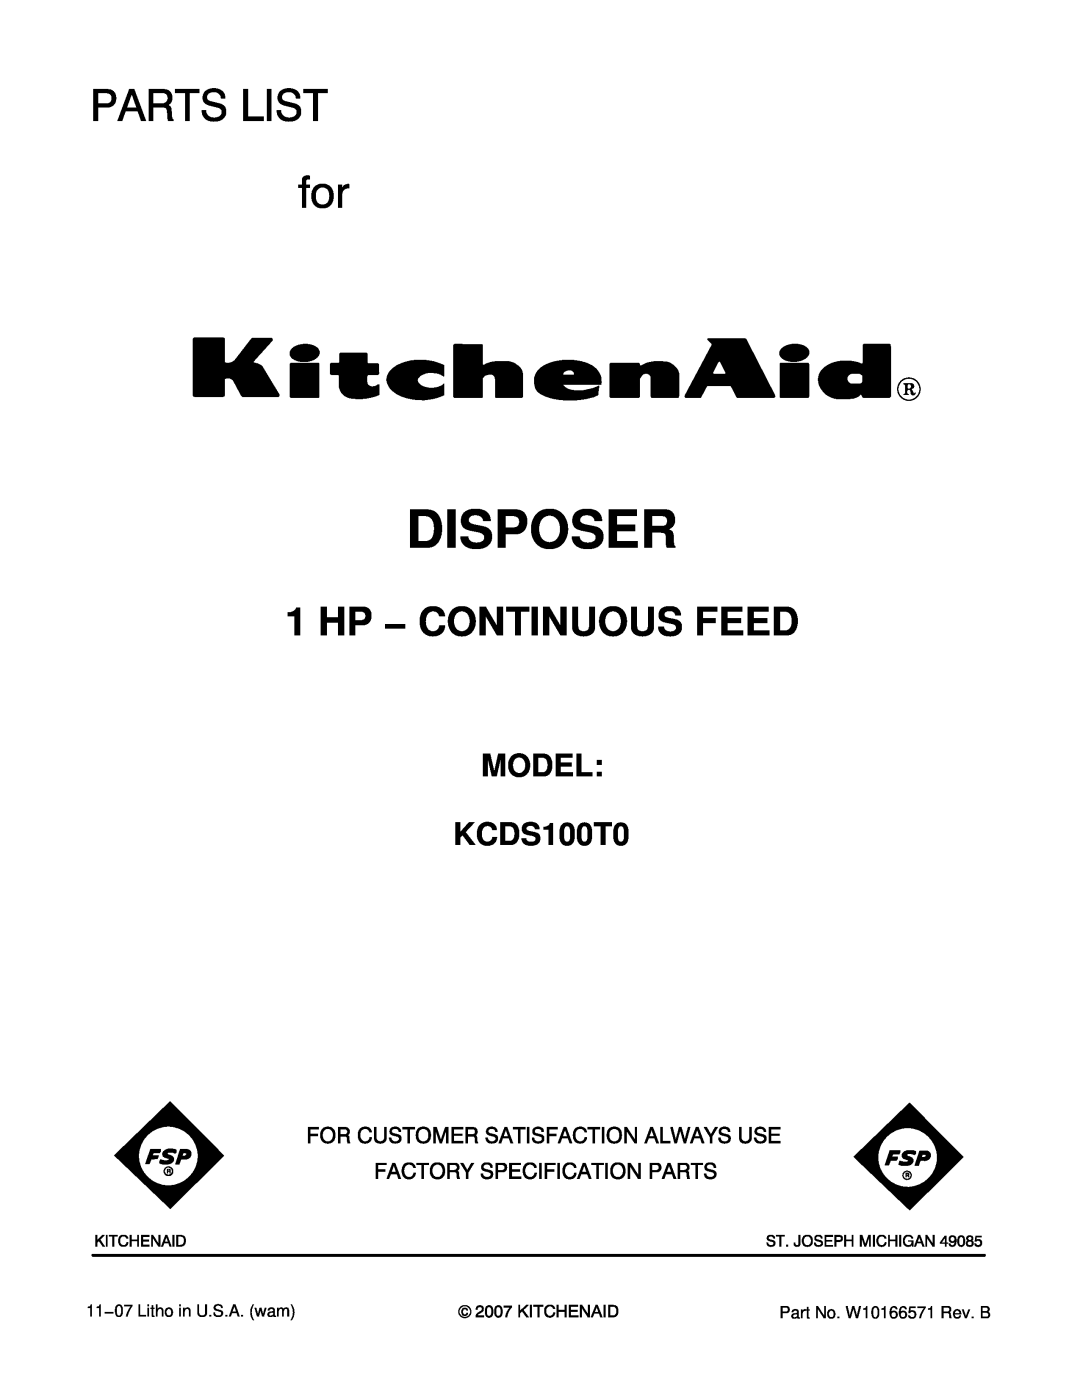 KitchenAid manual Disposer, 1 HP − CONTINUOUS FEED, MODEL KCDS100T0 